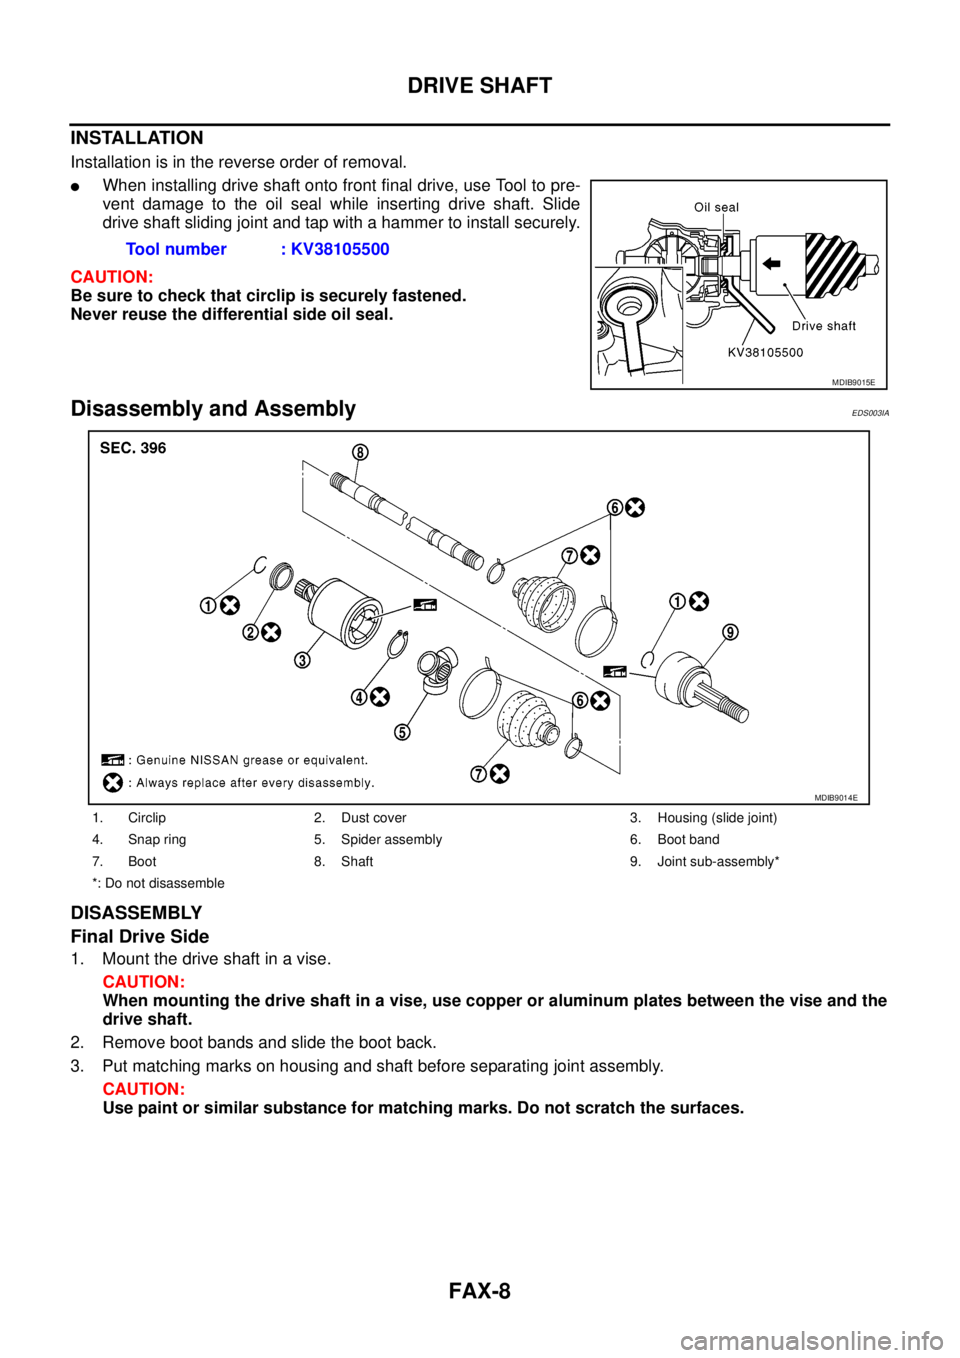 NISSAN NAVARA 2005  Repair Workshop Manual FAX-8
DRIVE SHAFT
INSTALLATION
Installation is in the reverse order of removal.
lWhen installing drive shaft onto front final drive, use Tool to pre-
vent damage to the oil seal while inserting drive 